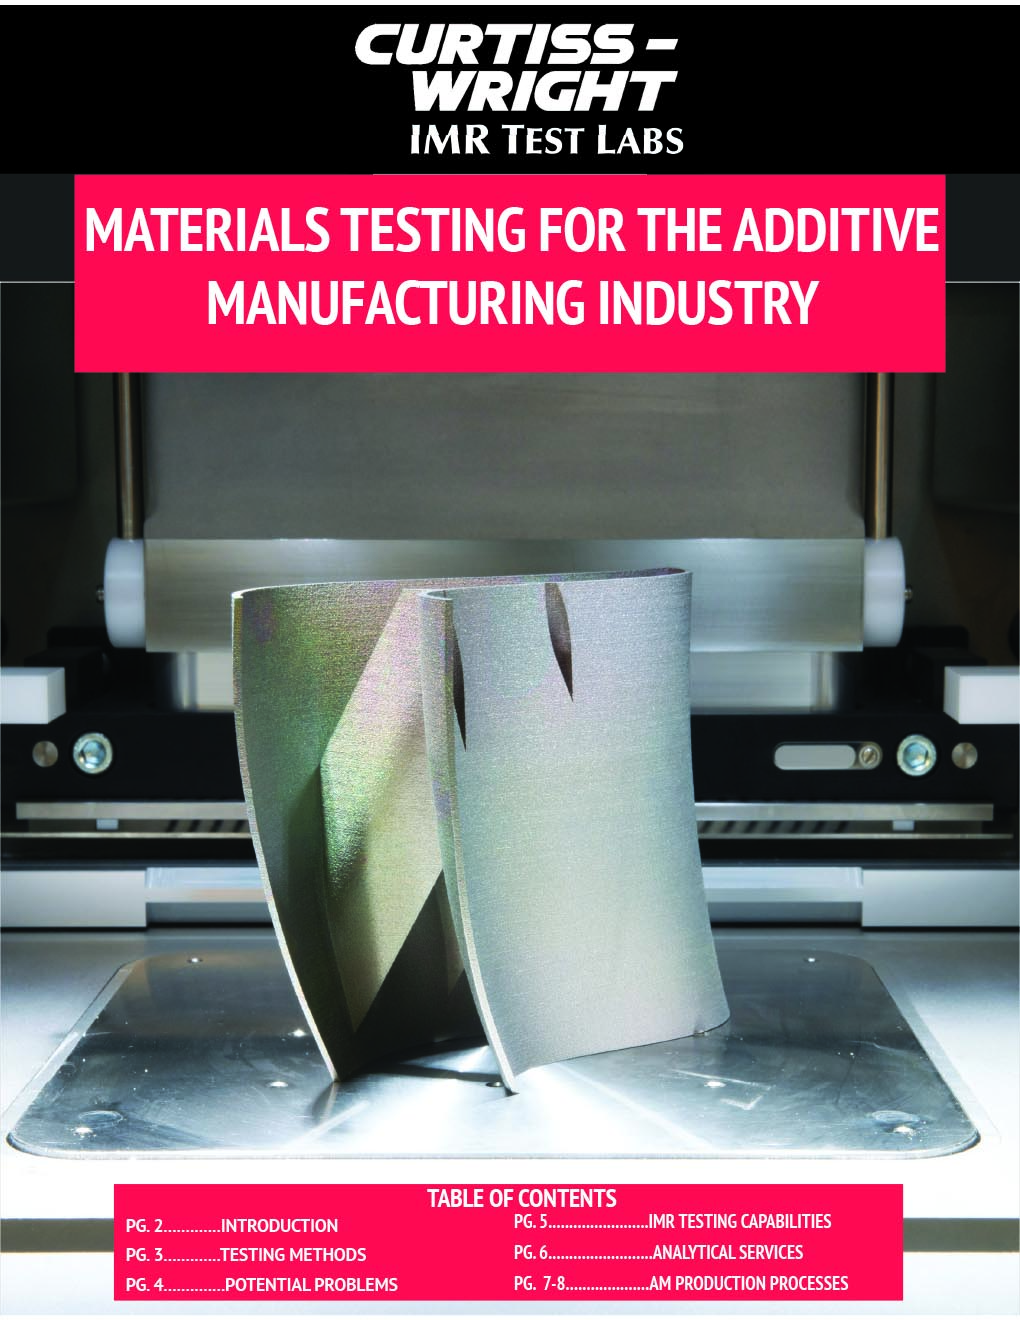 Material Testing for the Additive Manufacturing Industry